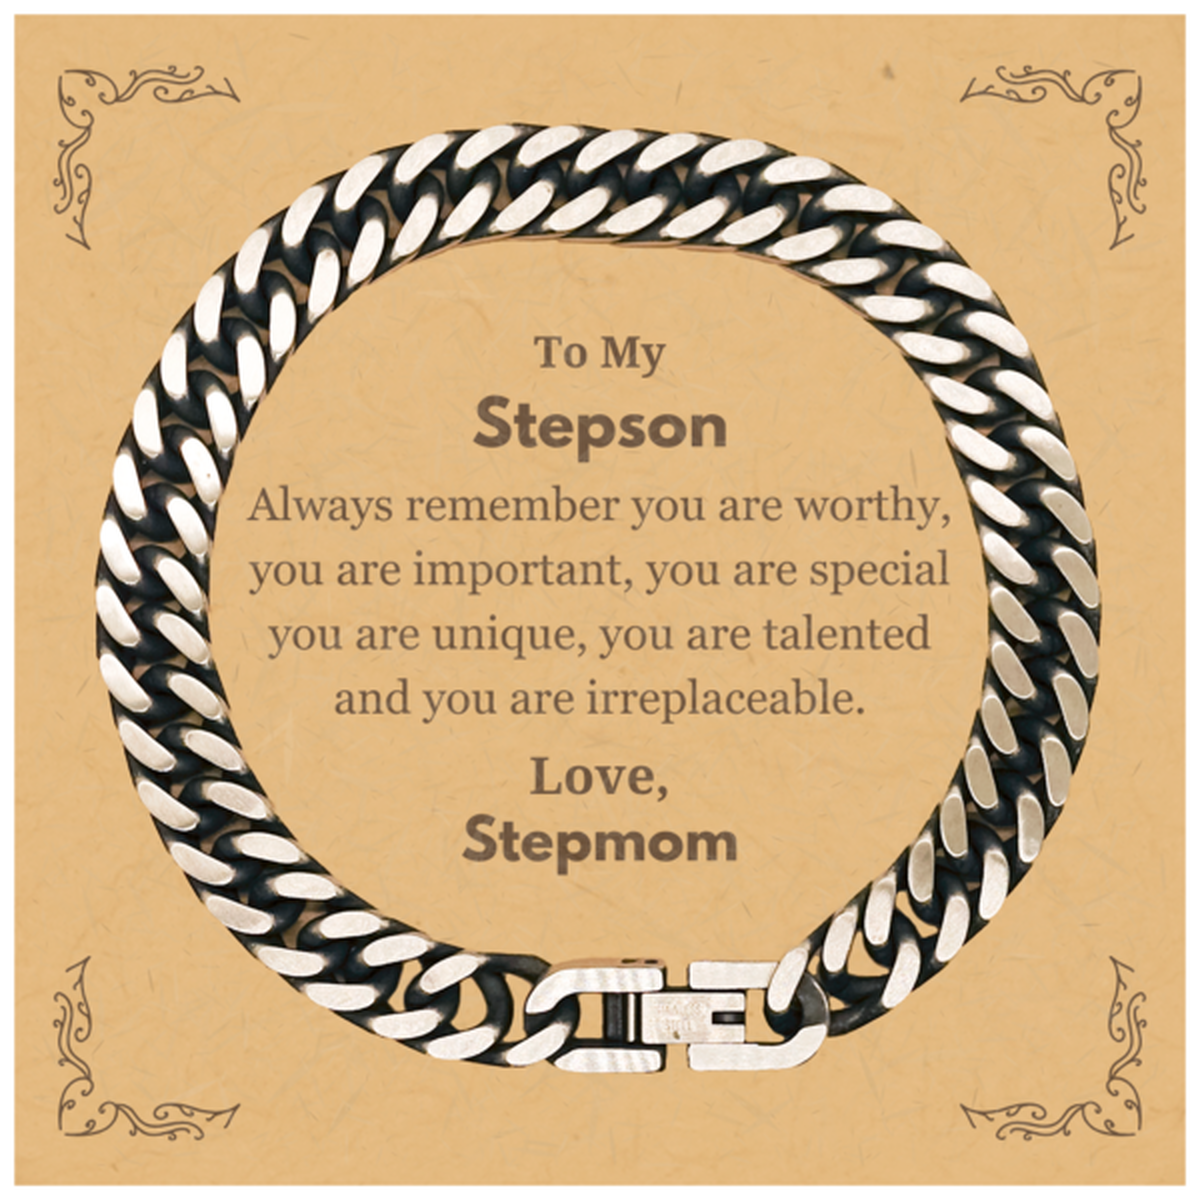 Stepson Birthday Gifts from Stepmom, Inspirational Cuban Link Chain Bracelet for Stepson Christmas Graduation Gifts for Stepson Always remember you are worthy, you are important. Love, Stepmom